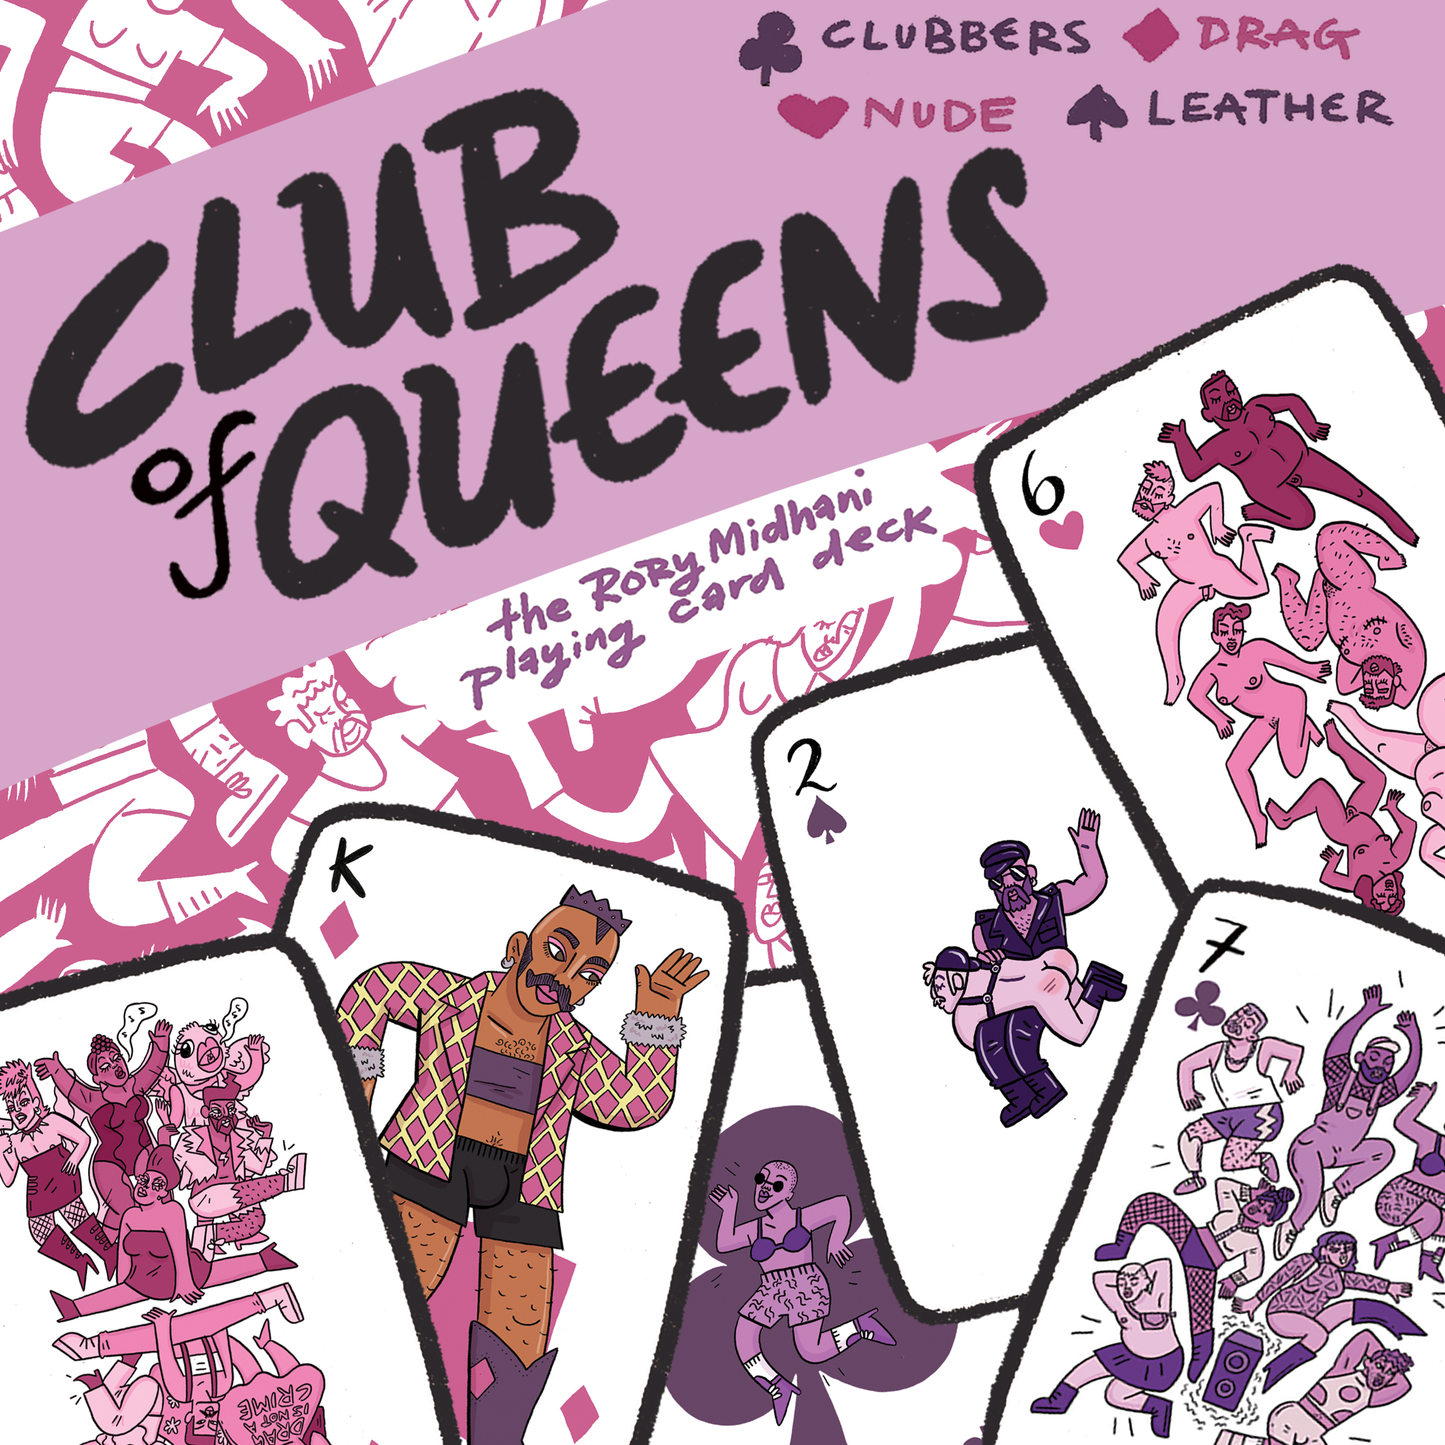 Club of Queens by Rory Midhani